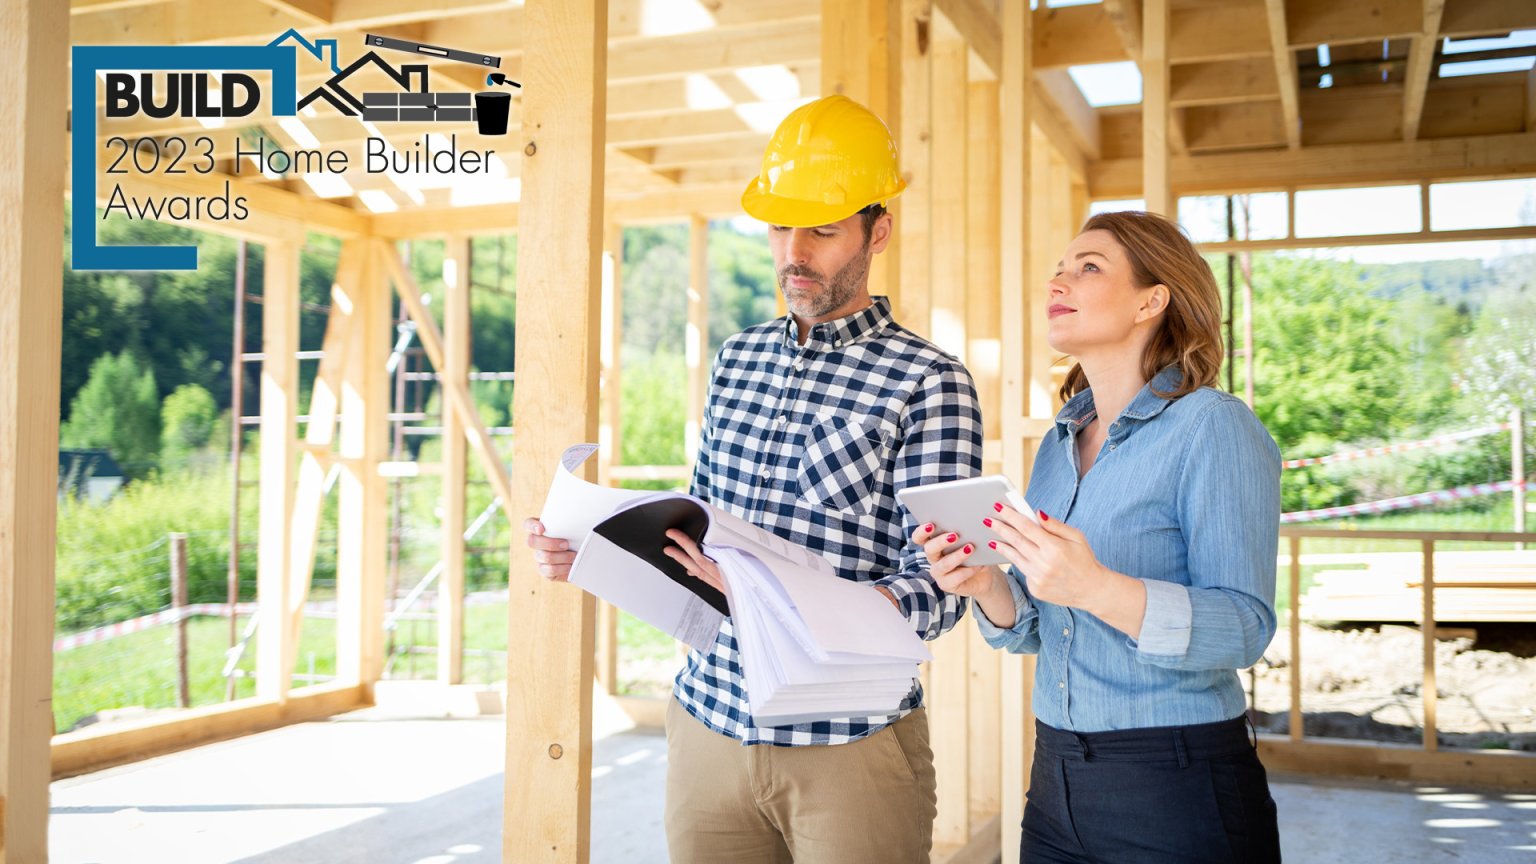 BUILD Magazine Announces the Winners of the 2023 Home Builder Awards